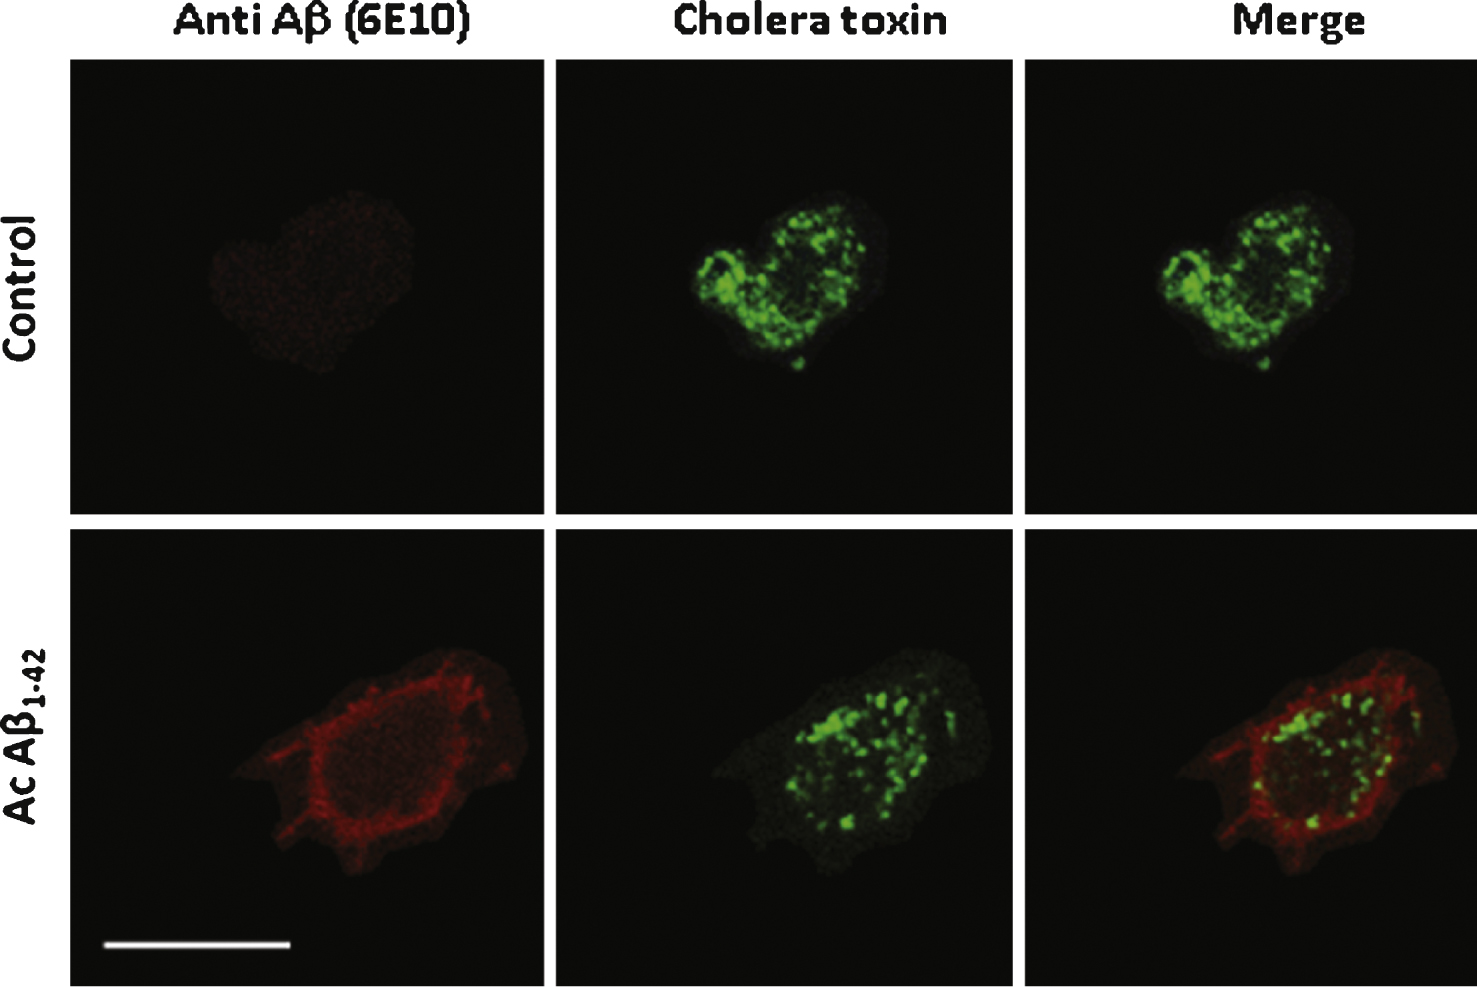 Aβ1–42 partially
co-localizes with cholera toxin on the surface of PC12 cells. Aβ1–42 immunochemical detection on PC12 cells. Cells were incubated with either 1 μM Aβ42–1 (the reverse peptide as a control condition) or with 1 μM Aβ42 (Ac Aβ1–42) prior to fixation and immunolabeling for Aβ1–42 (red) and cholera toxin (green). Aβ1–42 as revealed by the monoclonal antibody 6E10 (directed against every form of the peptide) partially colocalized with membrane microdomains revealed by cholera toxin as quantified by a Pearson coefficient of 0.23 ± 0.03. Calibration bar 20 μm.